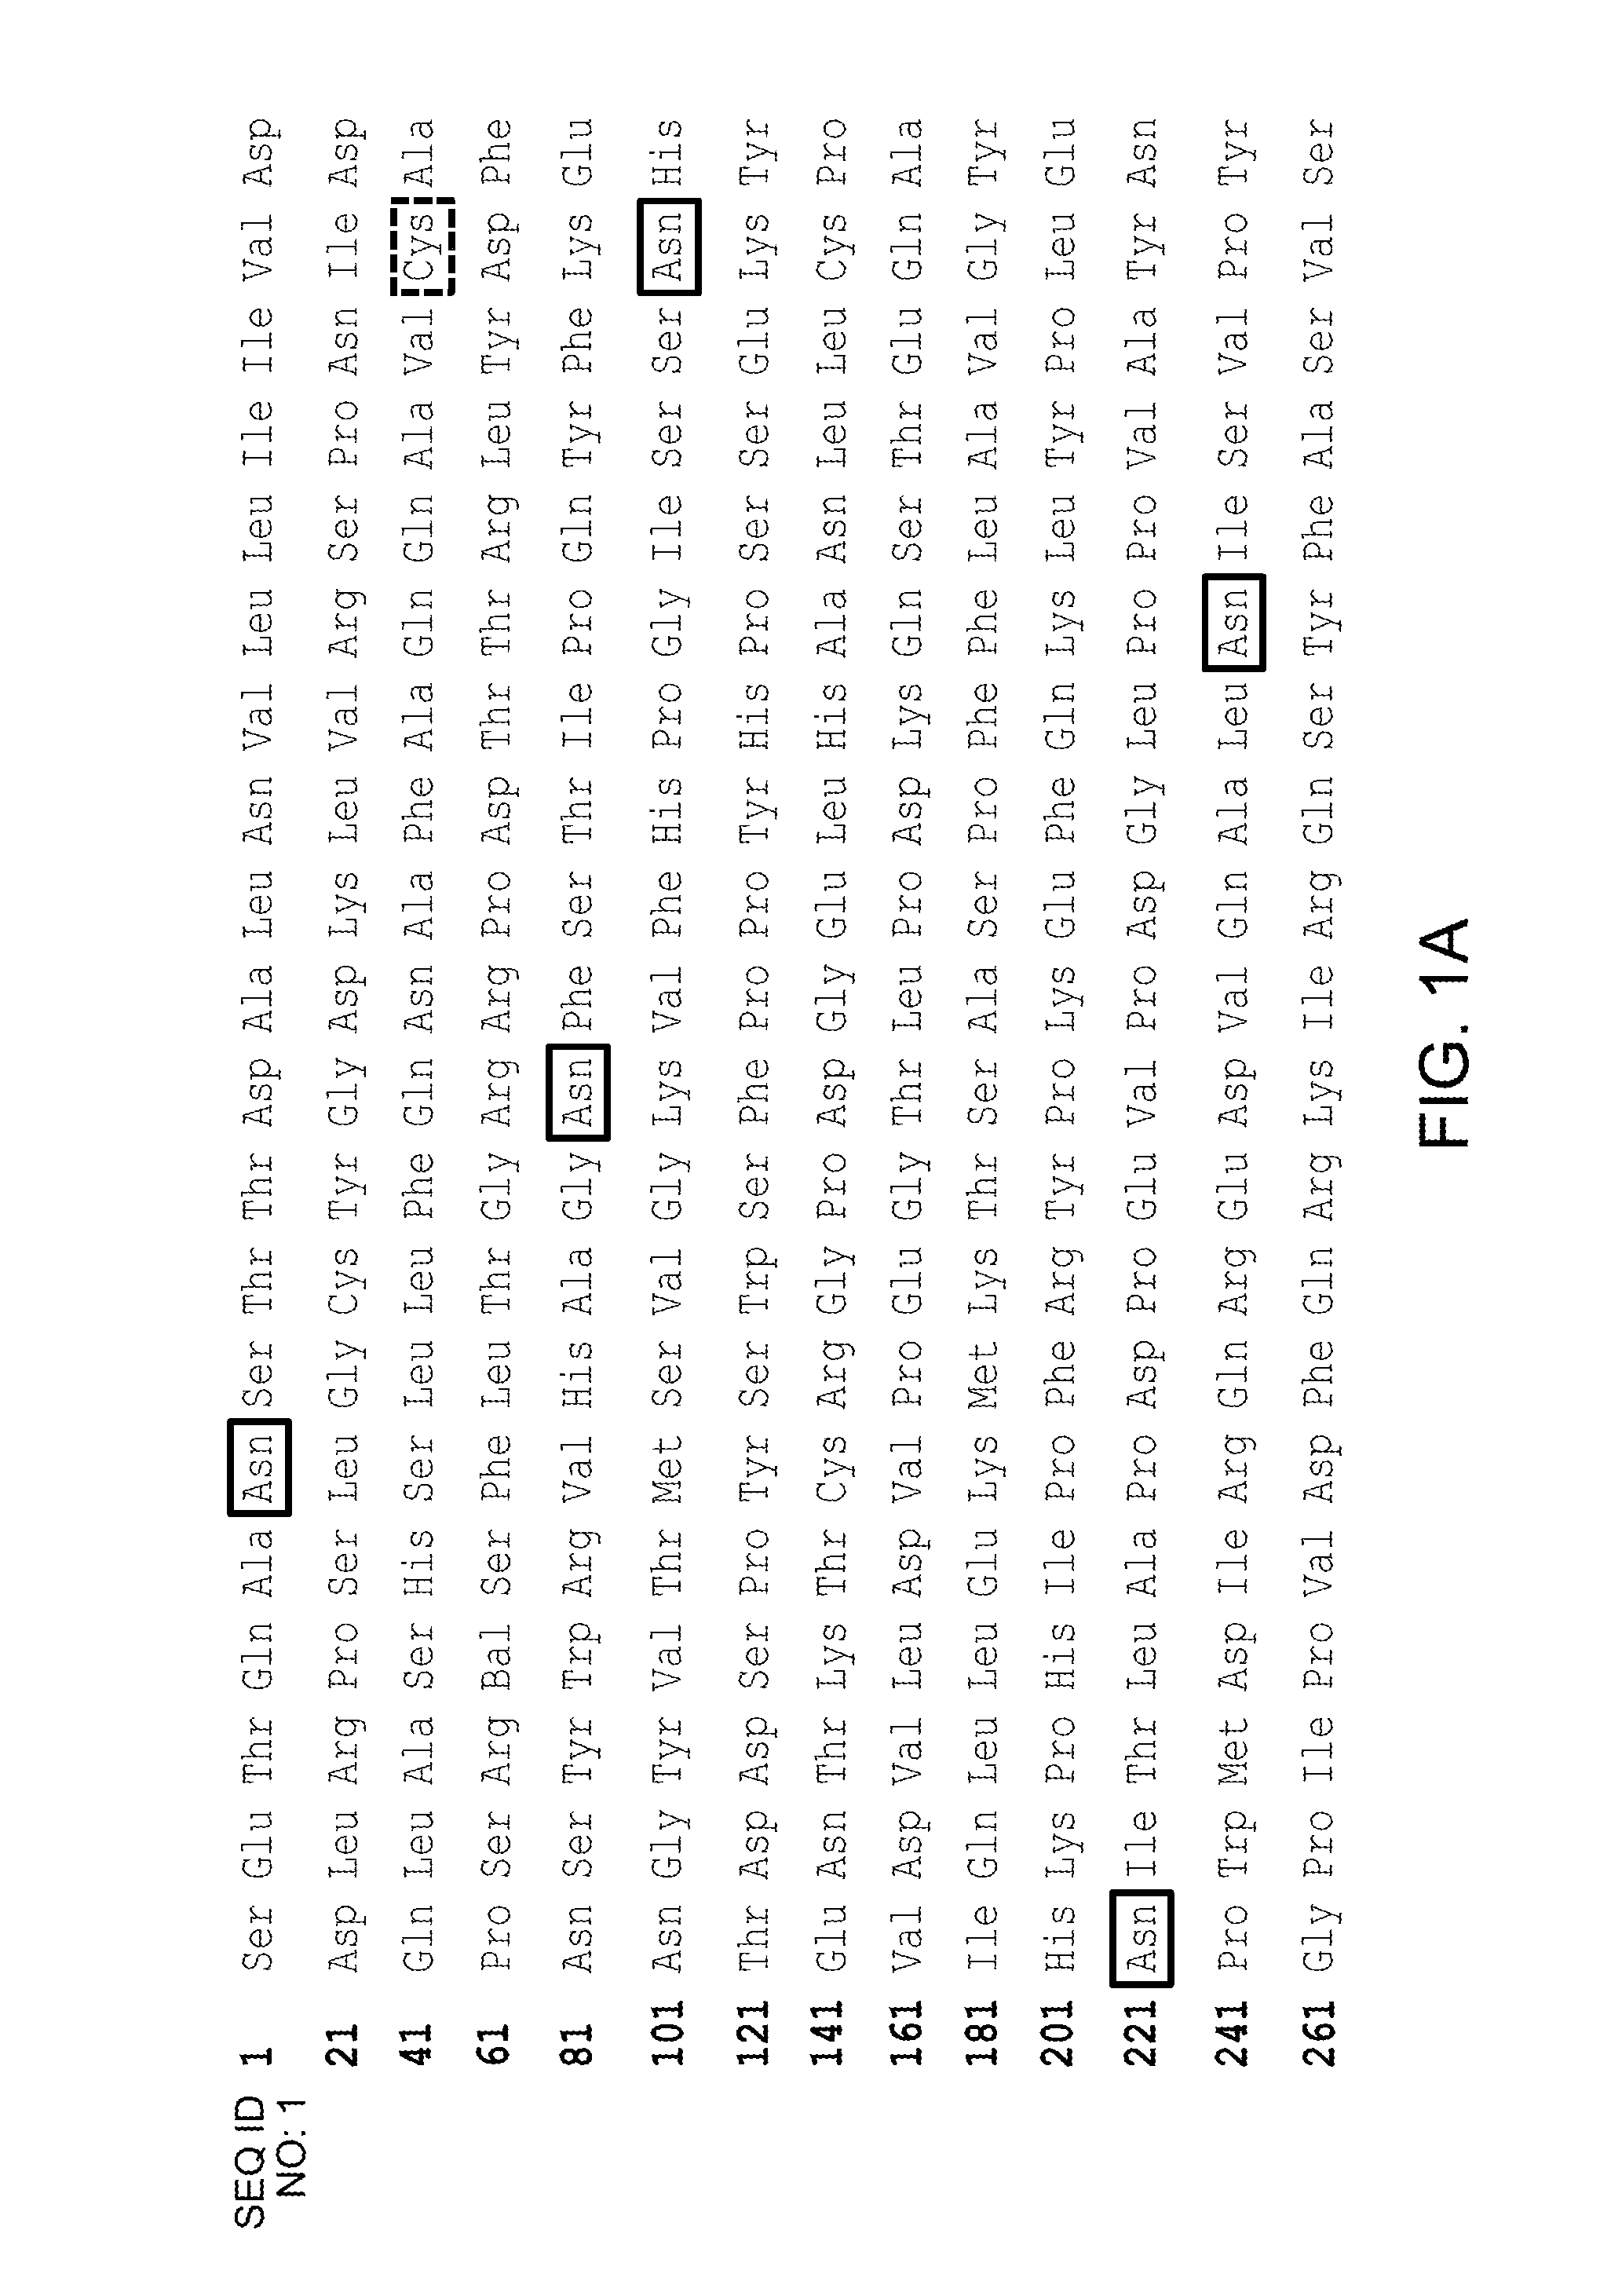 Cells for producing recombinant iduronate-2-sulfatase